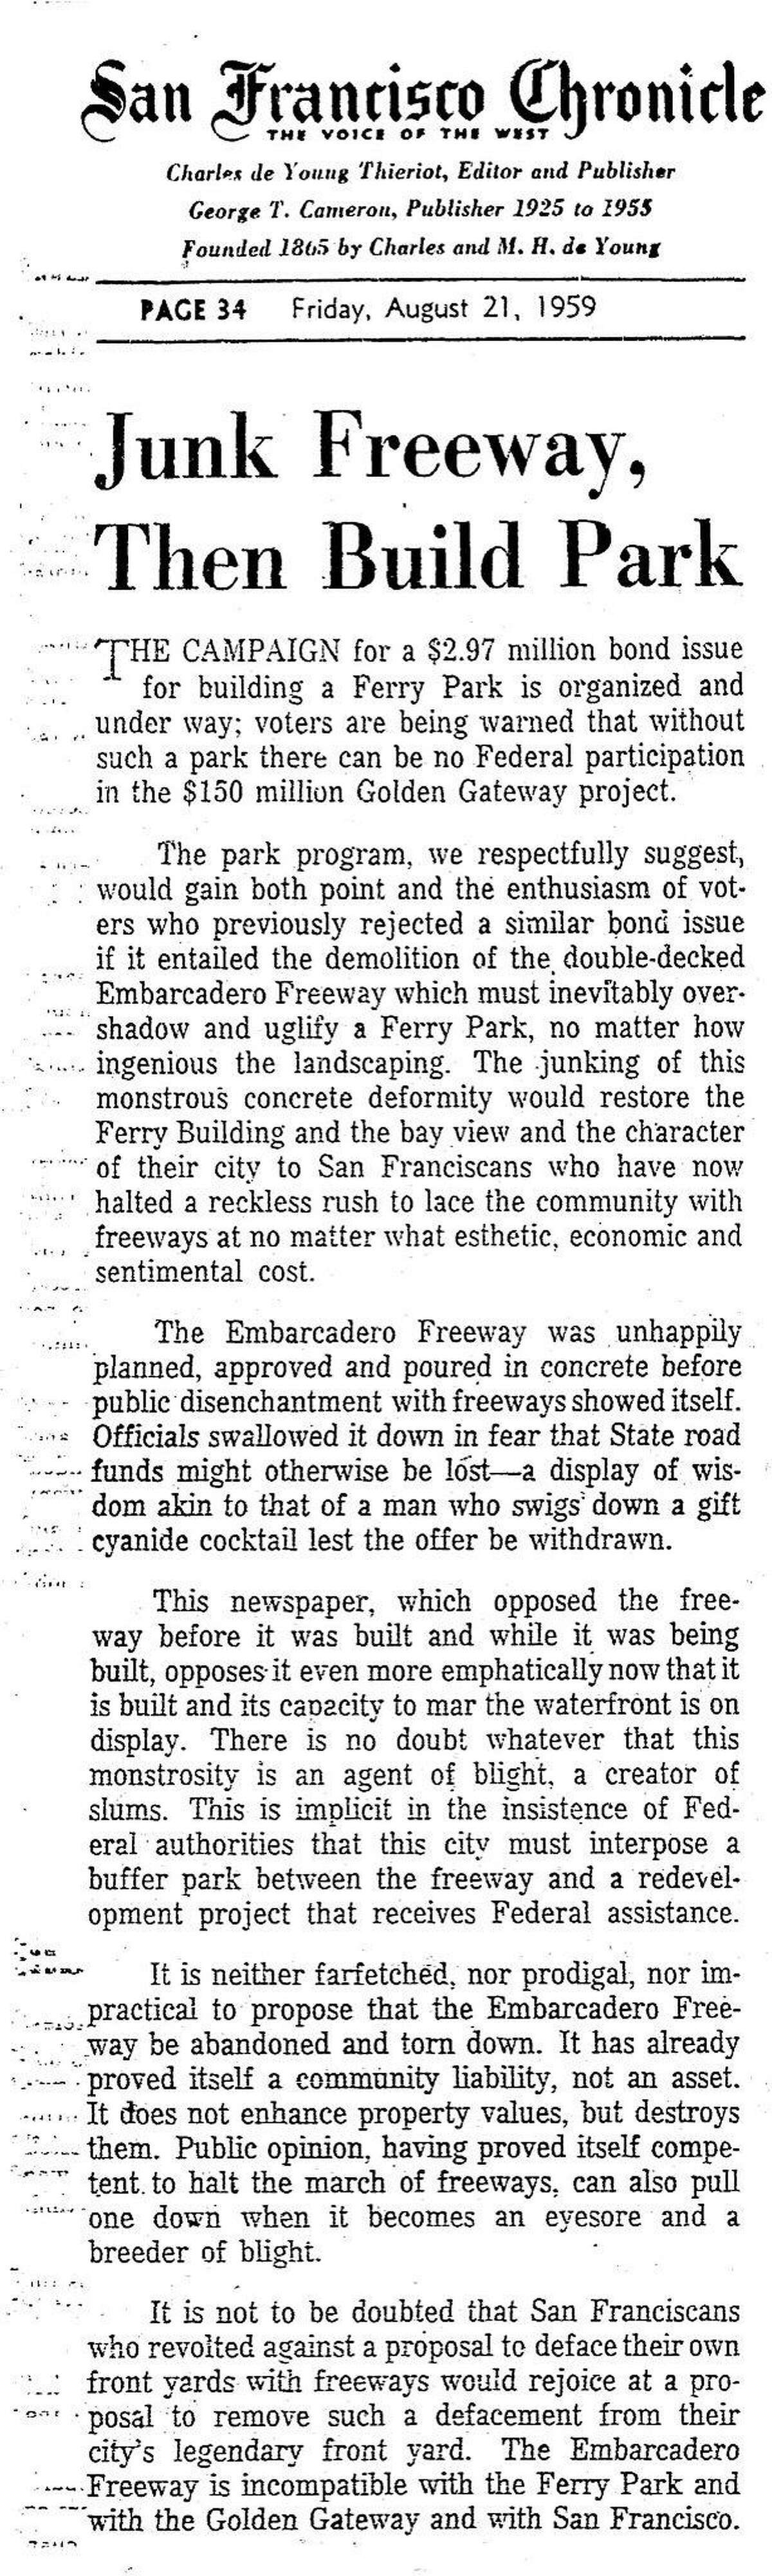 An August 21, 1959 Chronicle editorial about 6 month after it's opening, recommending demolition of the Embarcadero Freeway.